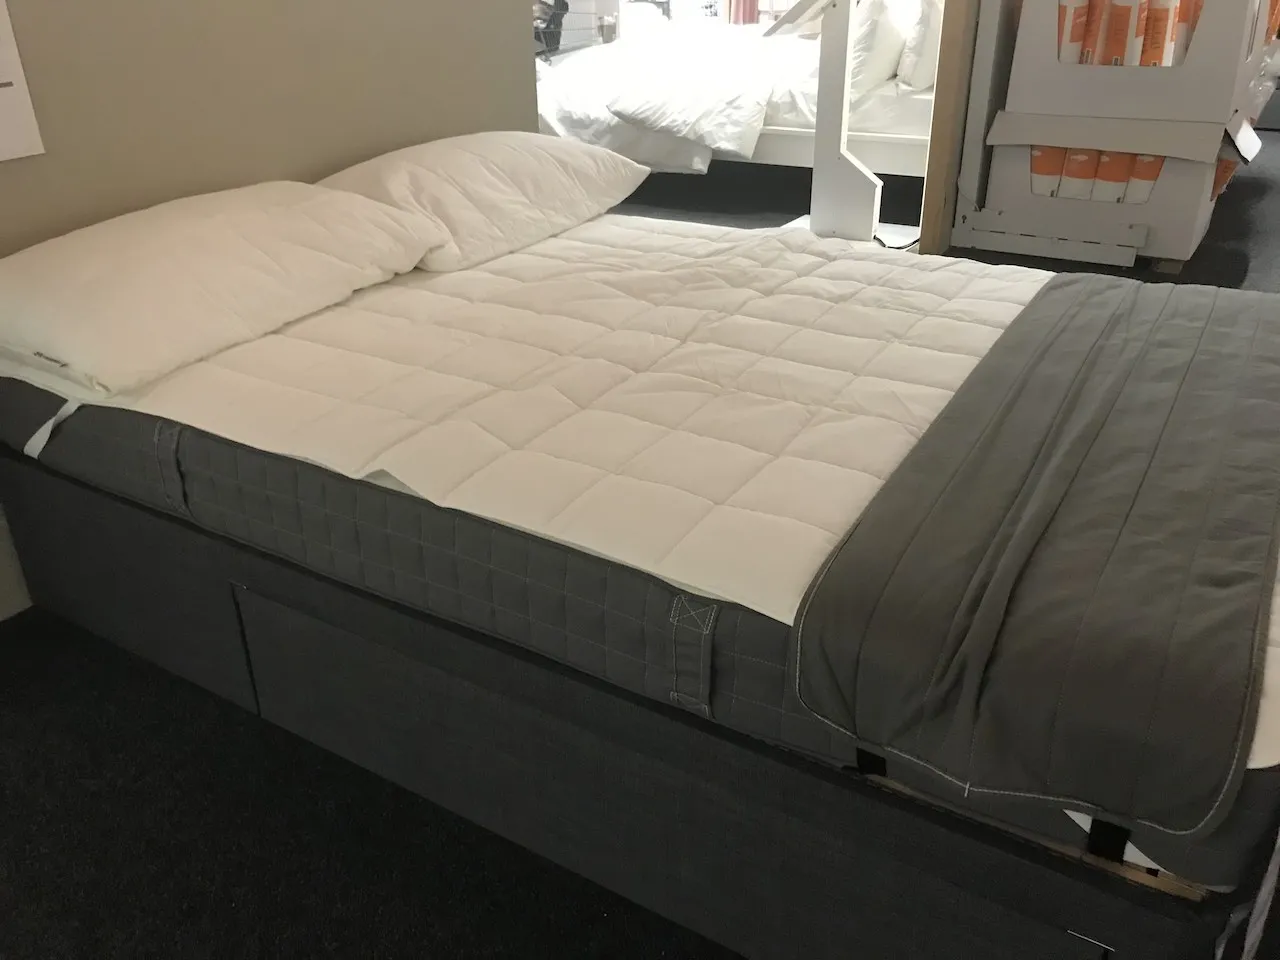 Are IKEA matresses good? Ultimate IKEA bed Review - John Ryan by Design